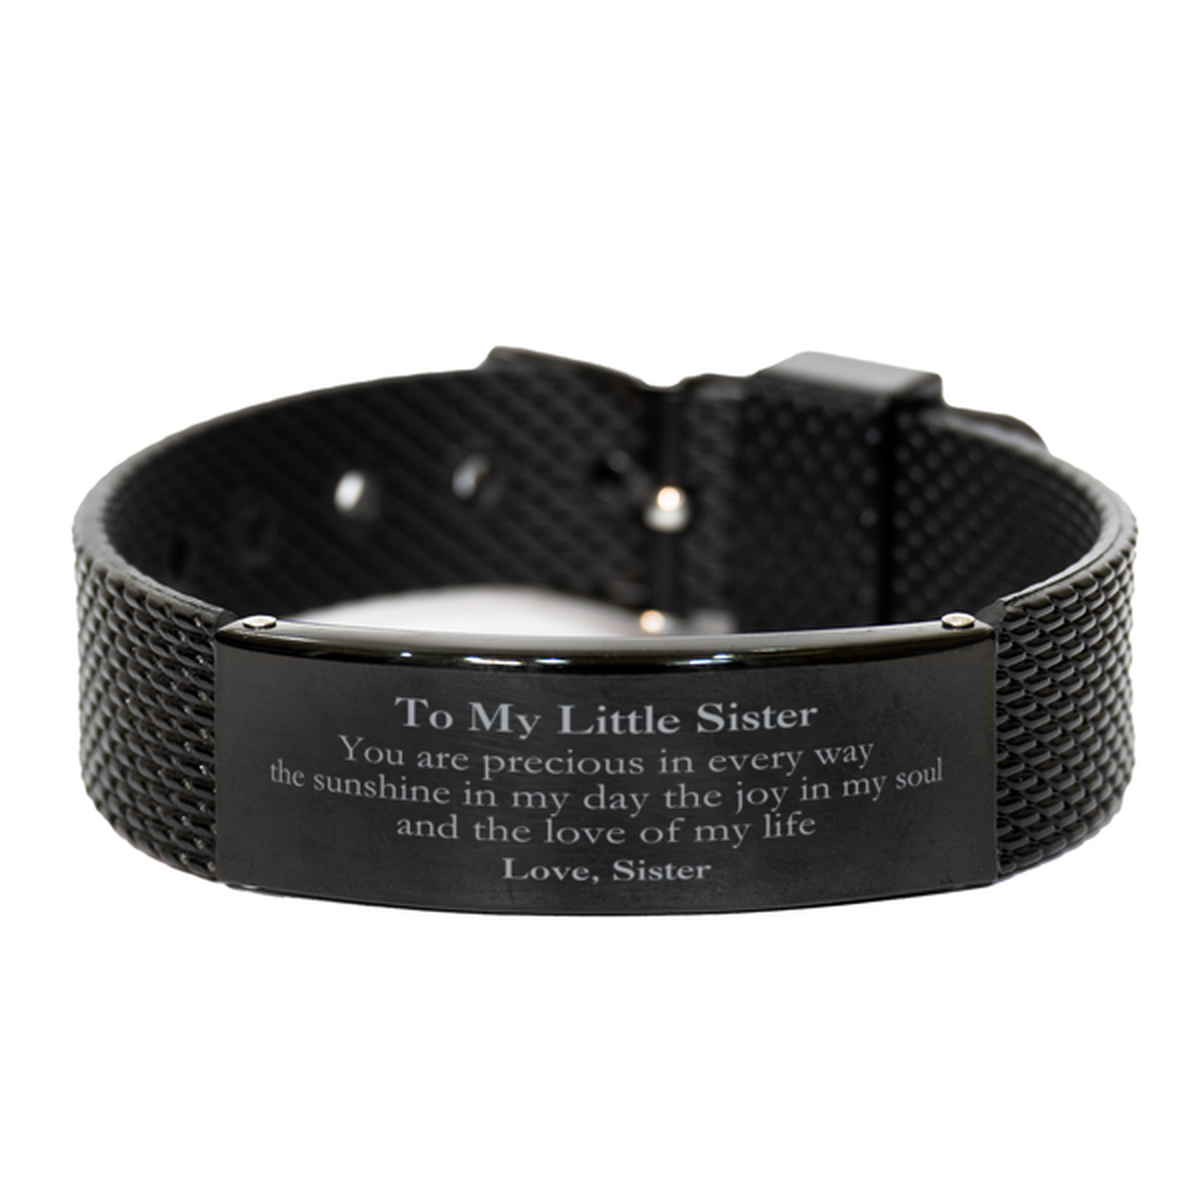 Graduation Gifts for Little Sister Black Shark Mesh Bracelet Present from Sister, Christmas Little Sister Birthday Gifts Little Sister You are precious in every way the sunshine in my day. Love, Sister